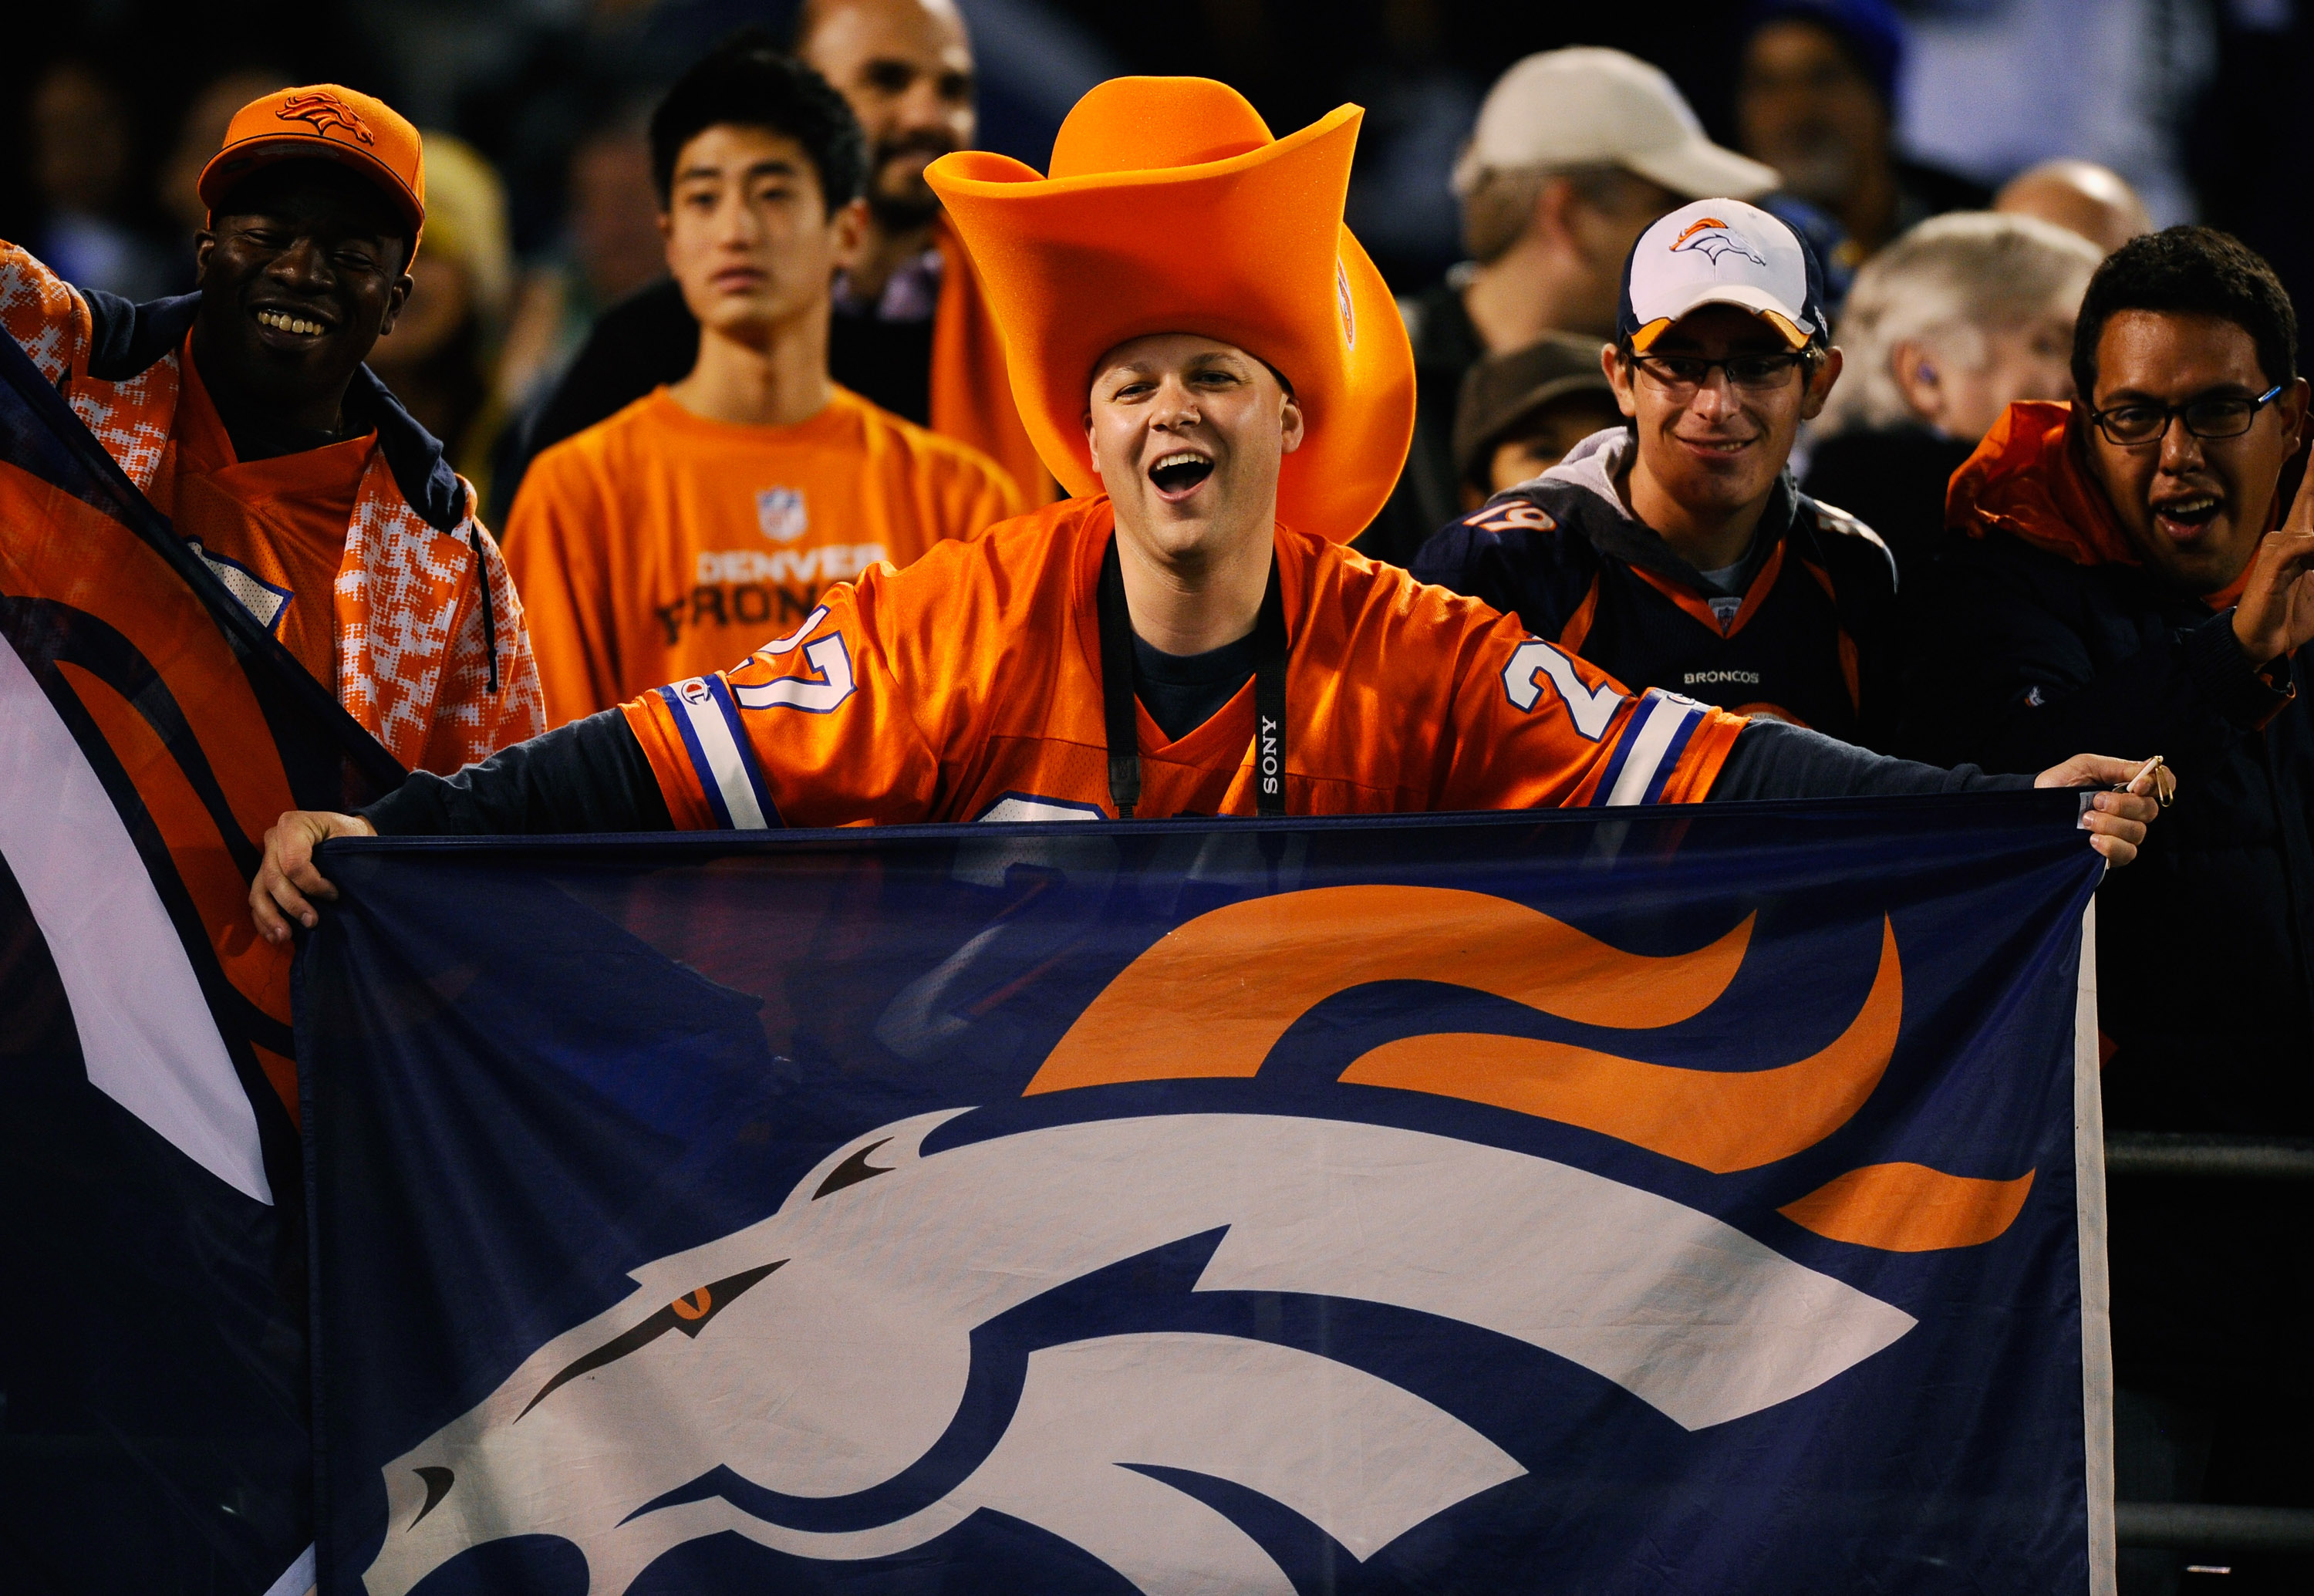 Power Ranking All 32 Nfl Teams Loudest And Loyal Fanbases Bleacher Report Latest News